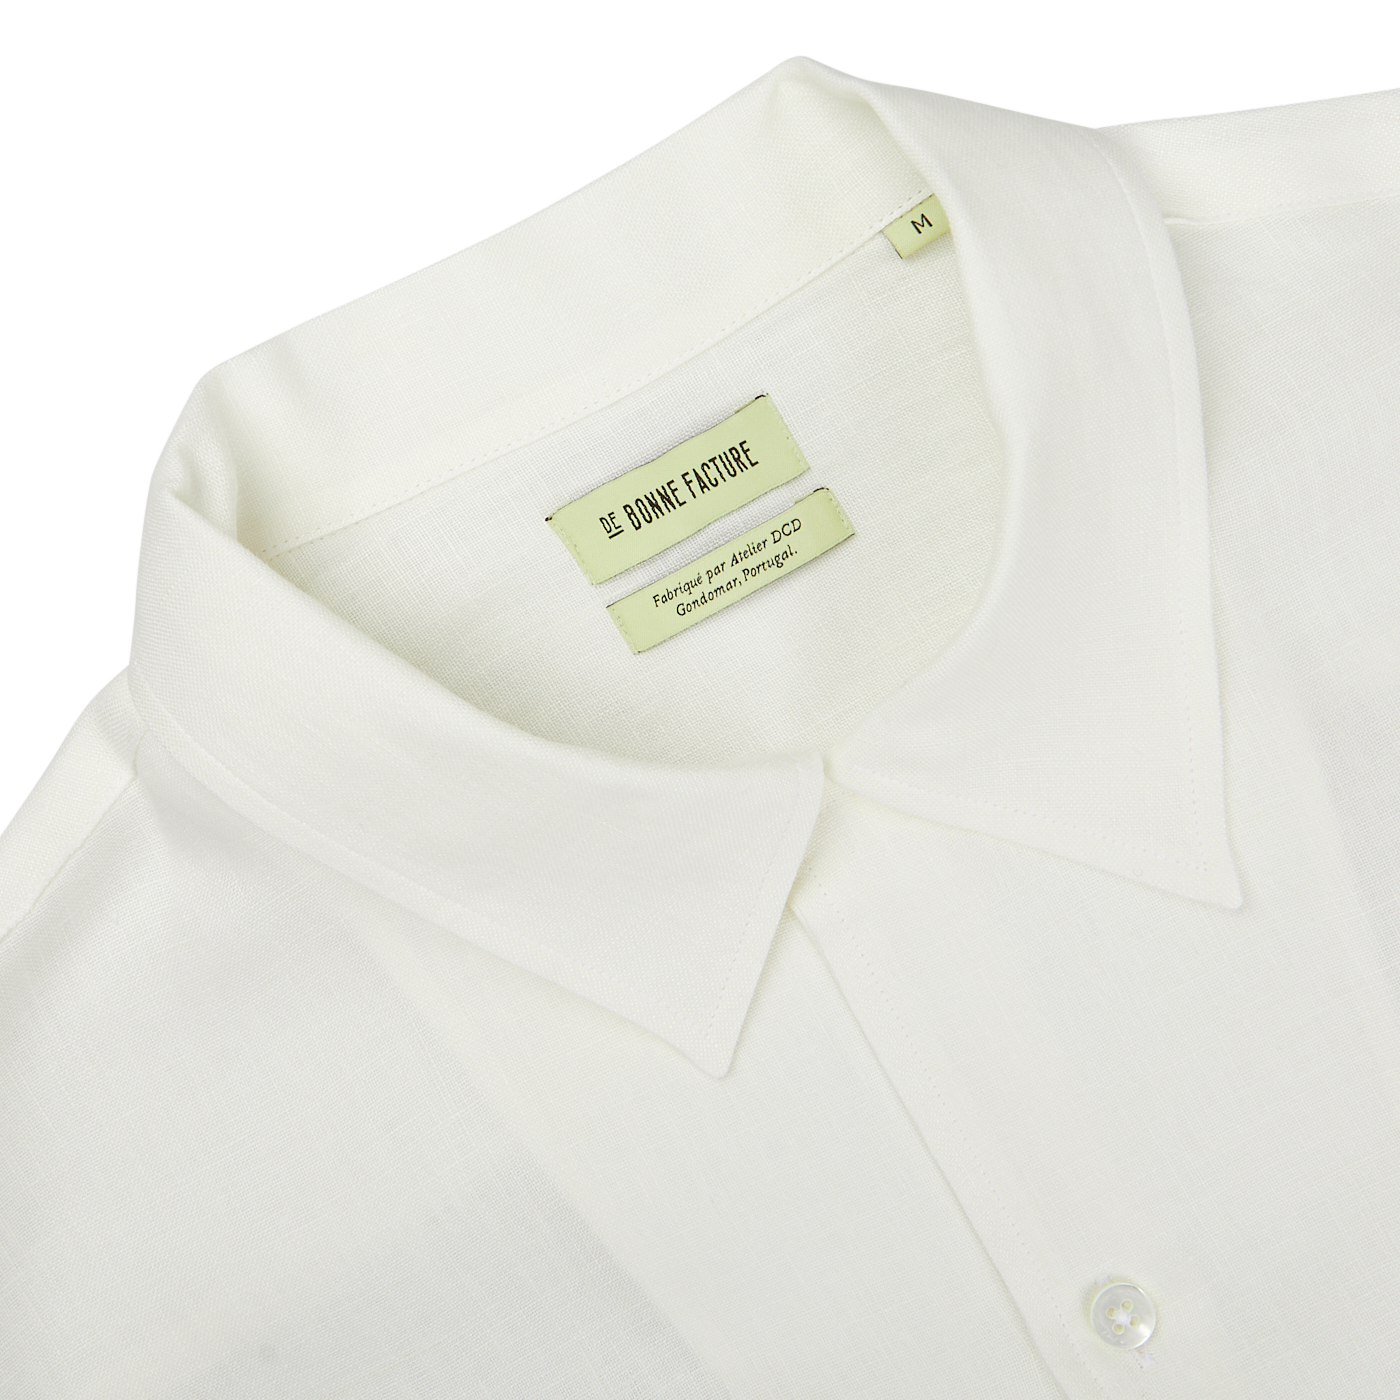 Close-up of an Off White Linen Floral Embroidered Shirt with a Garden of Eden embroidery and a green label inside showing the brand name "De Bonne Facture" and size "M".